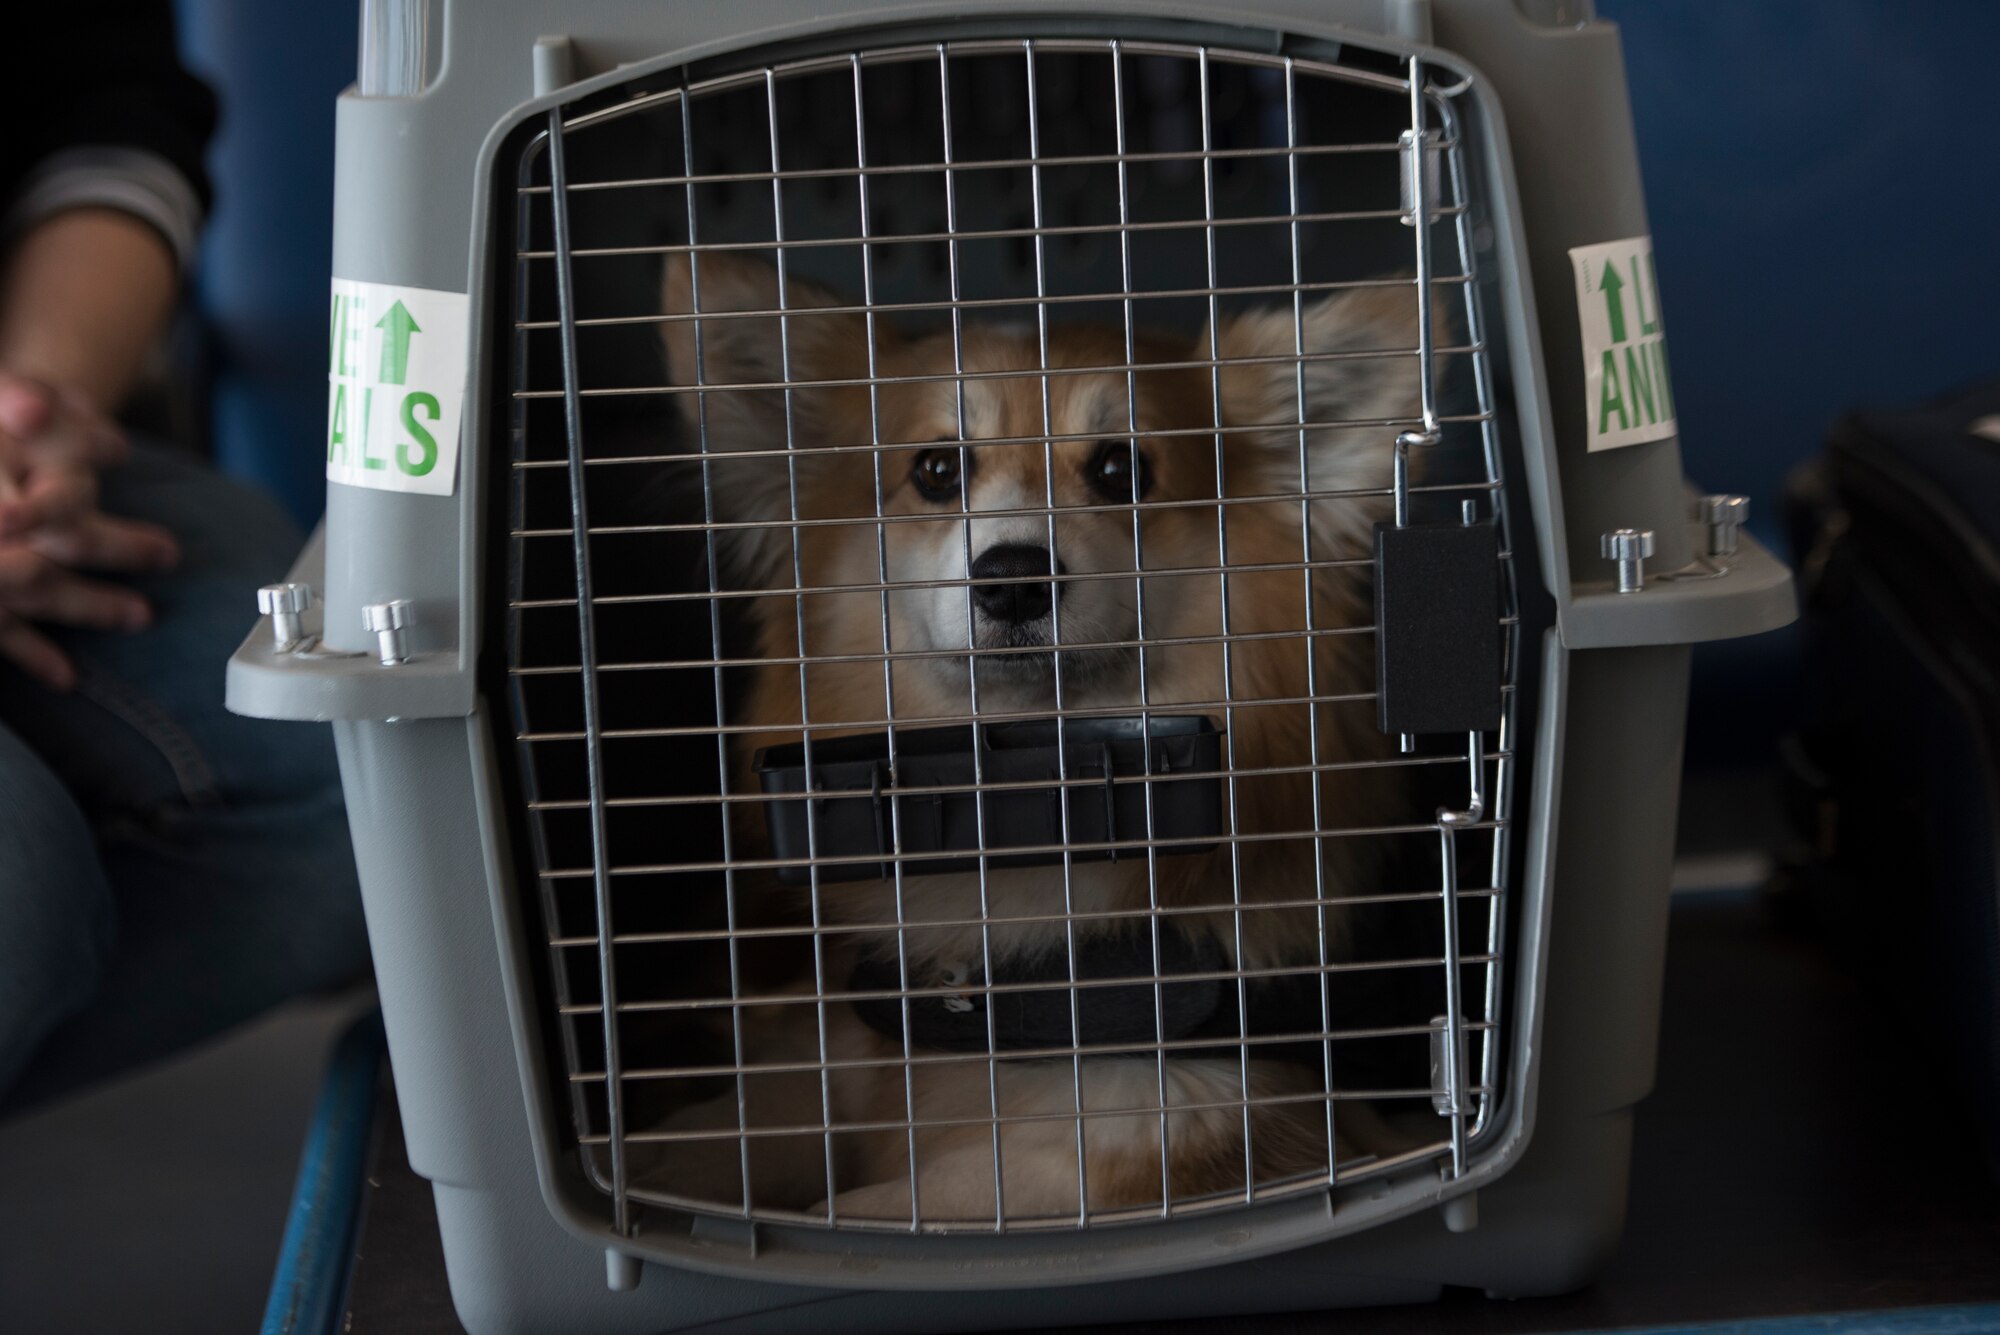 A photo of a dog sitting in a kennel.